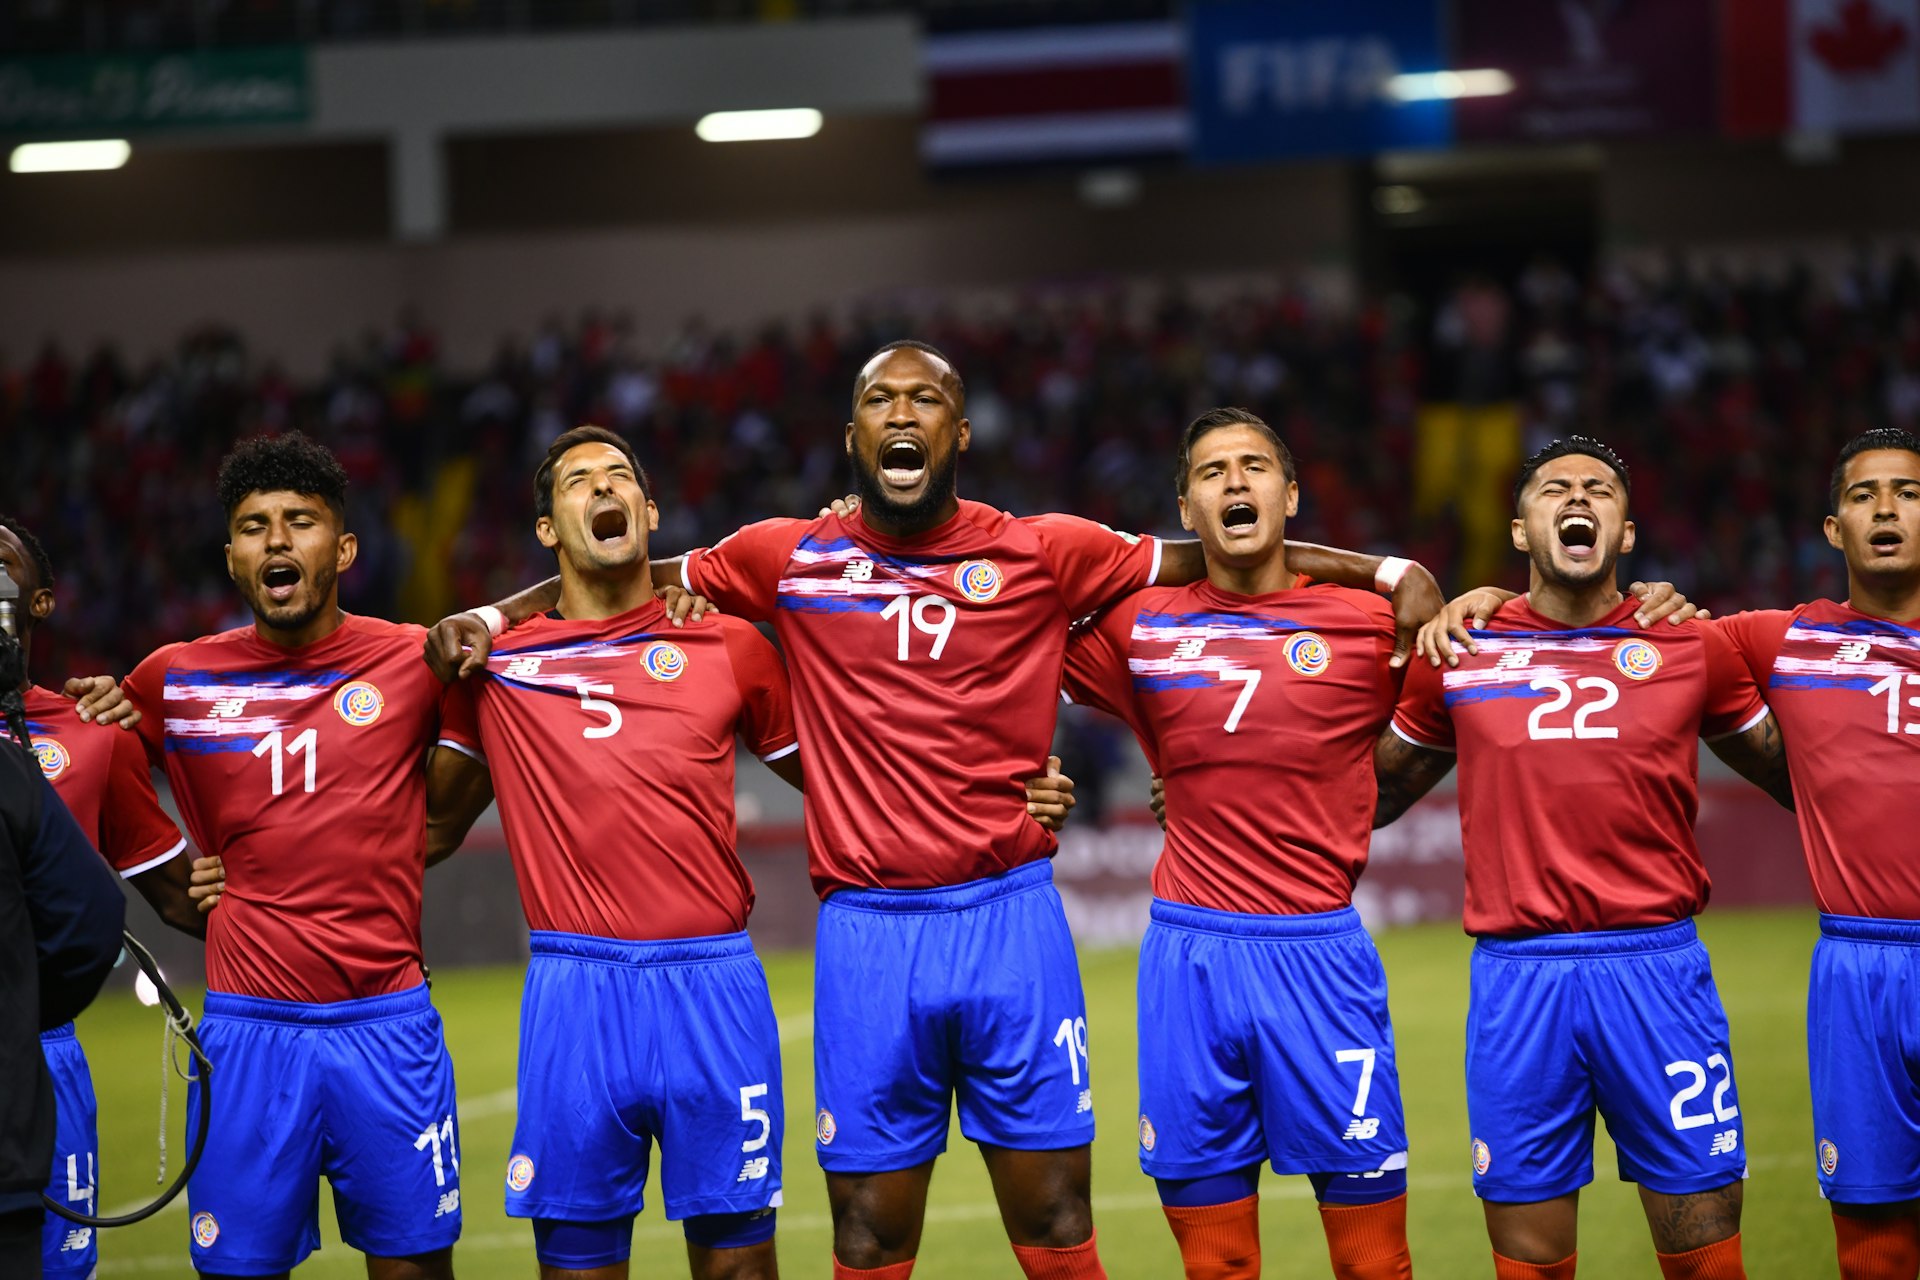 Costa Rican team sings the national anthem before the start of the match against Canada